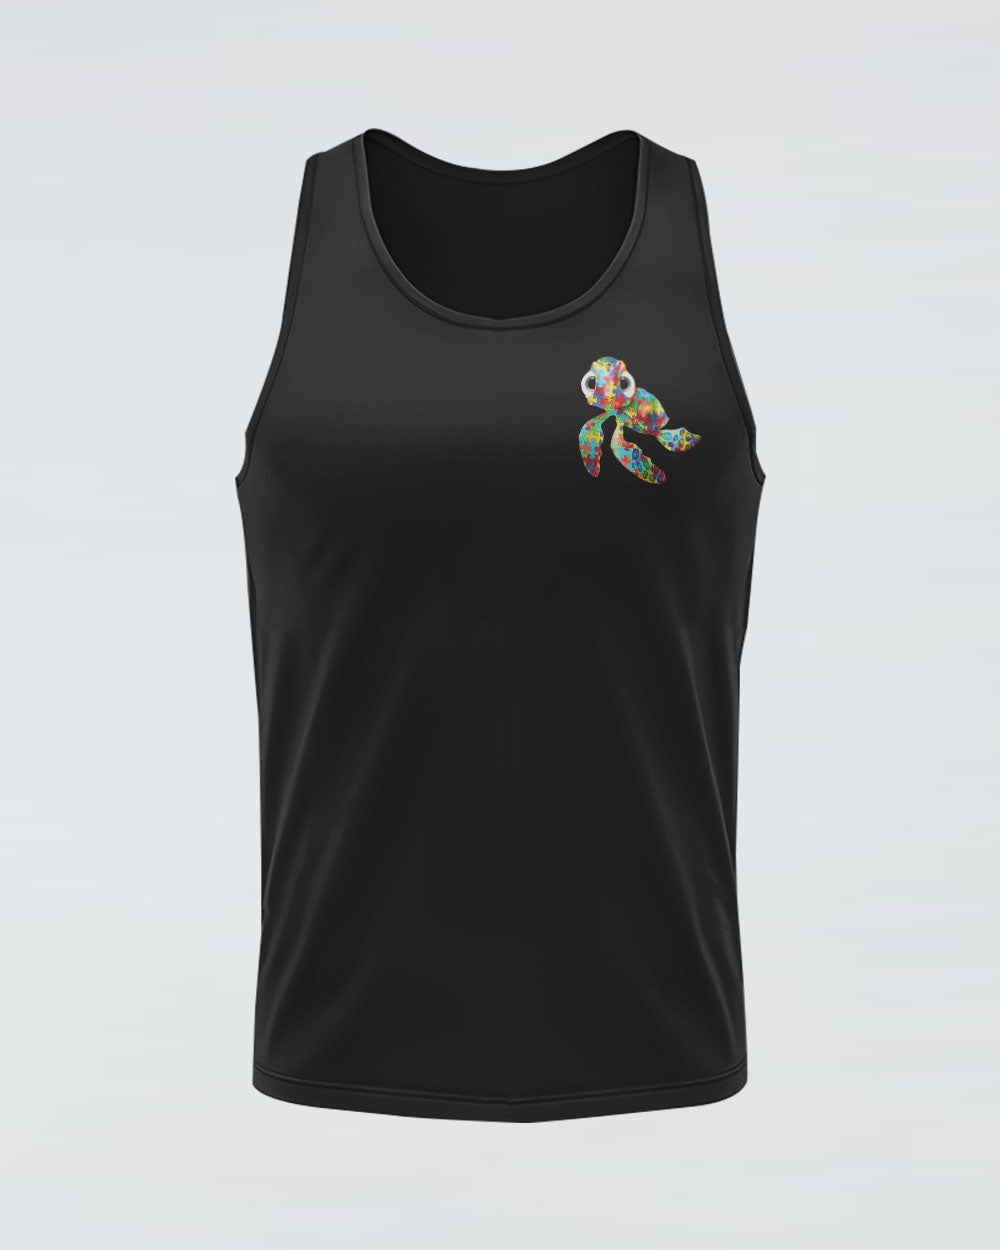 Be You The World Will Adjust Turtle Women's Autism Awareness Tanks